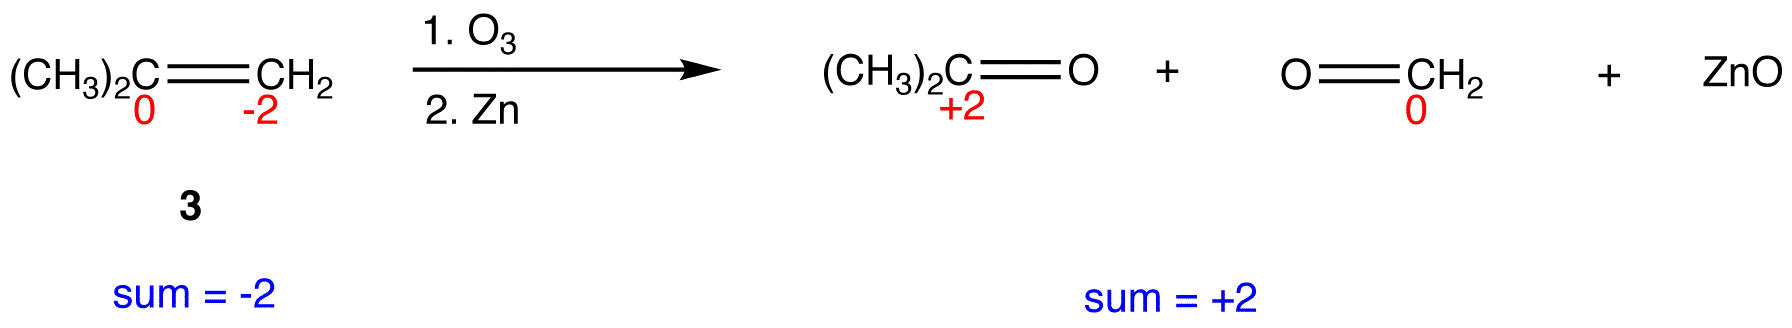 oxidation7.png